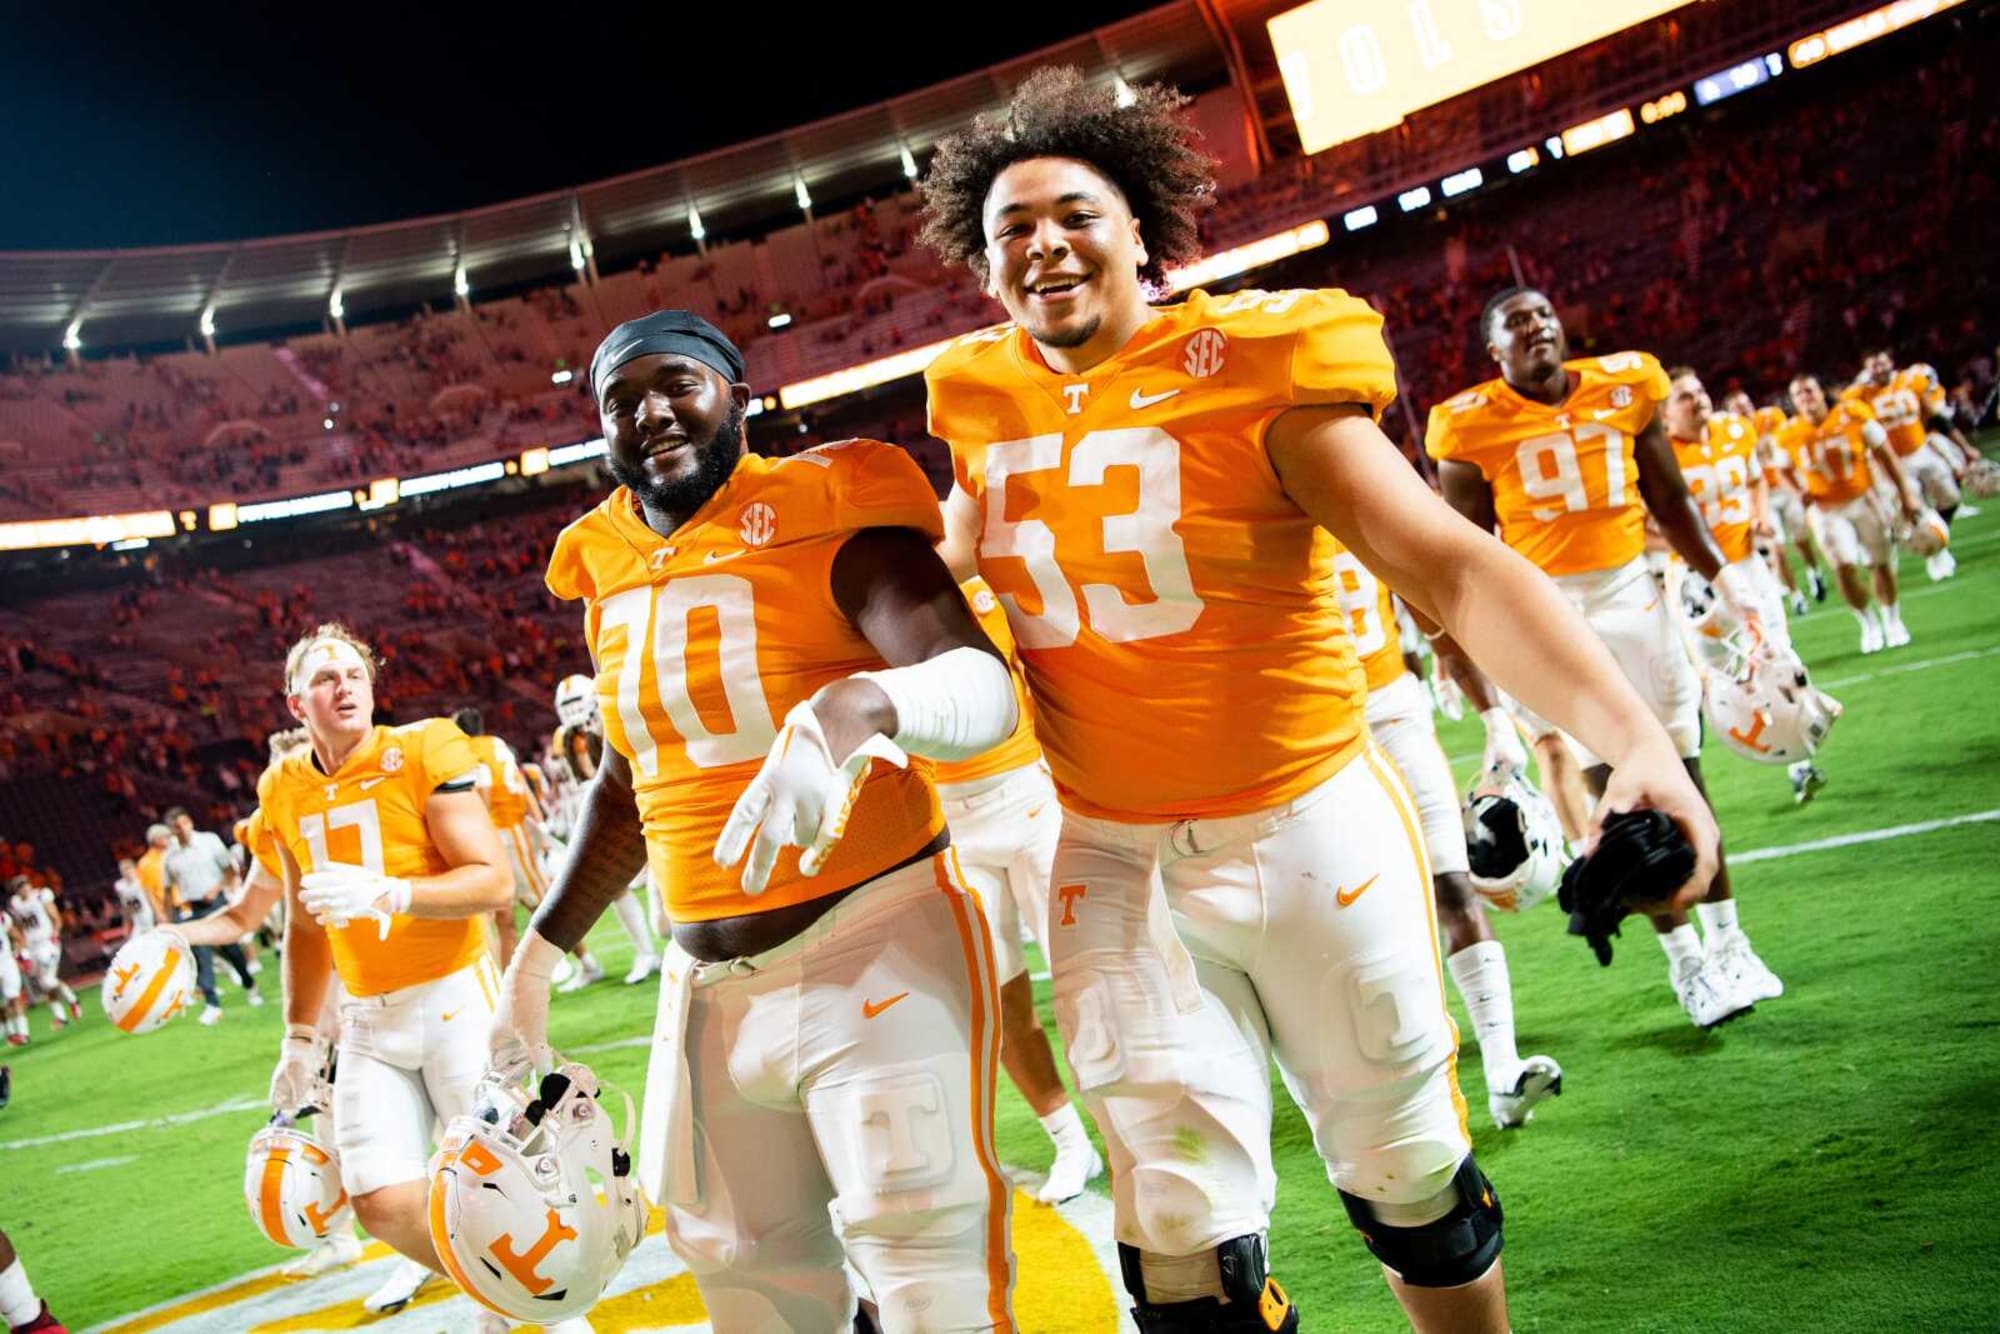 Tennessee football cracks AP Top 25, but that may not be a good sign